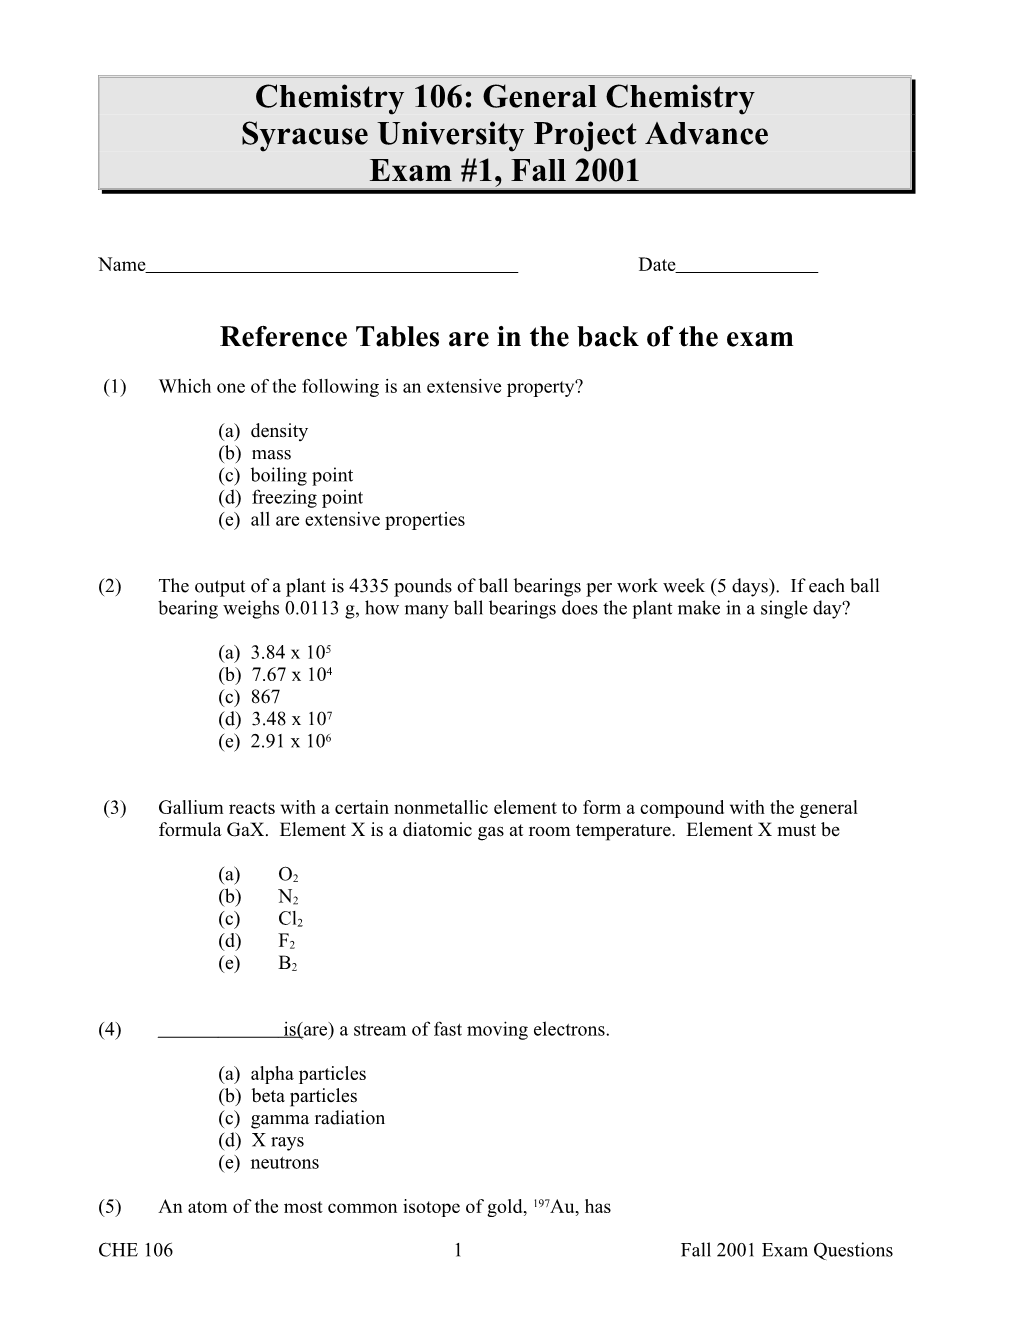 Reference Tables Are in the Back of the Exam